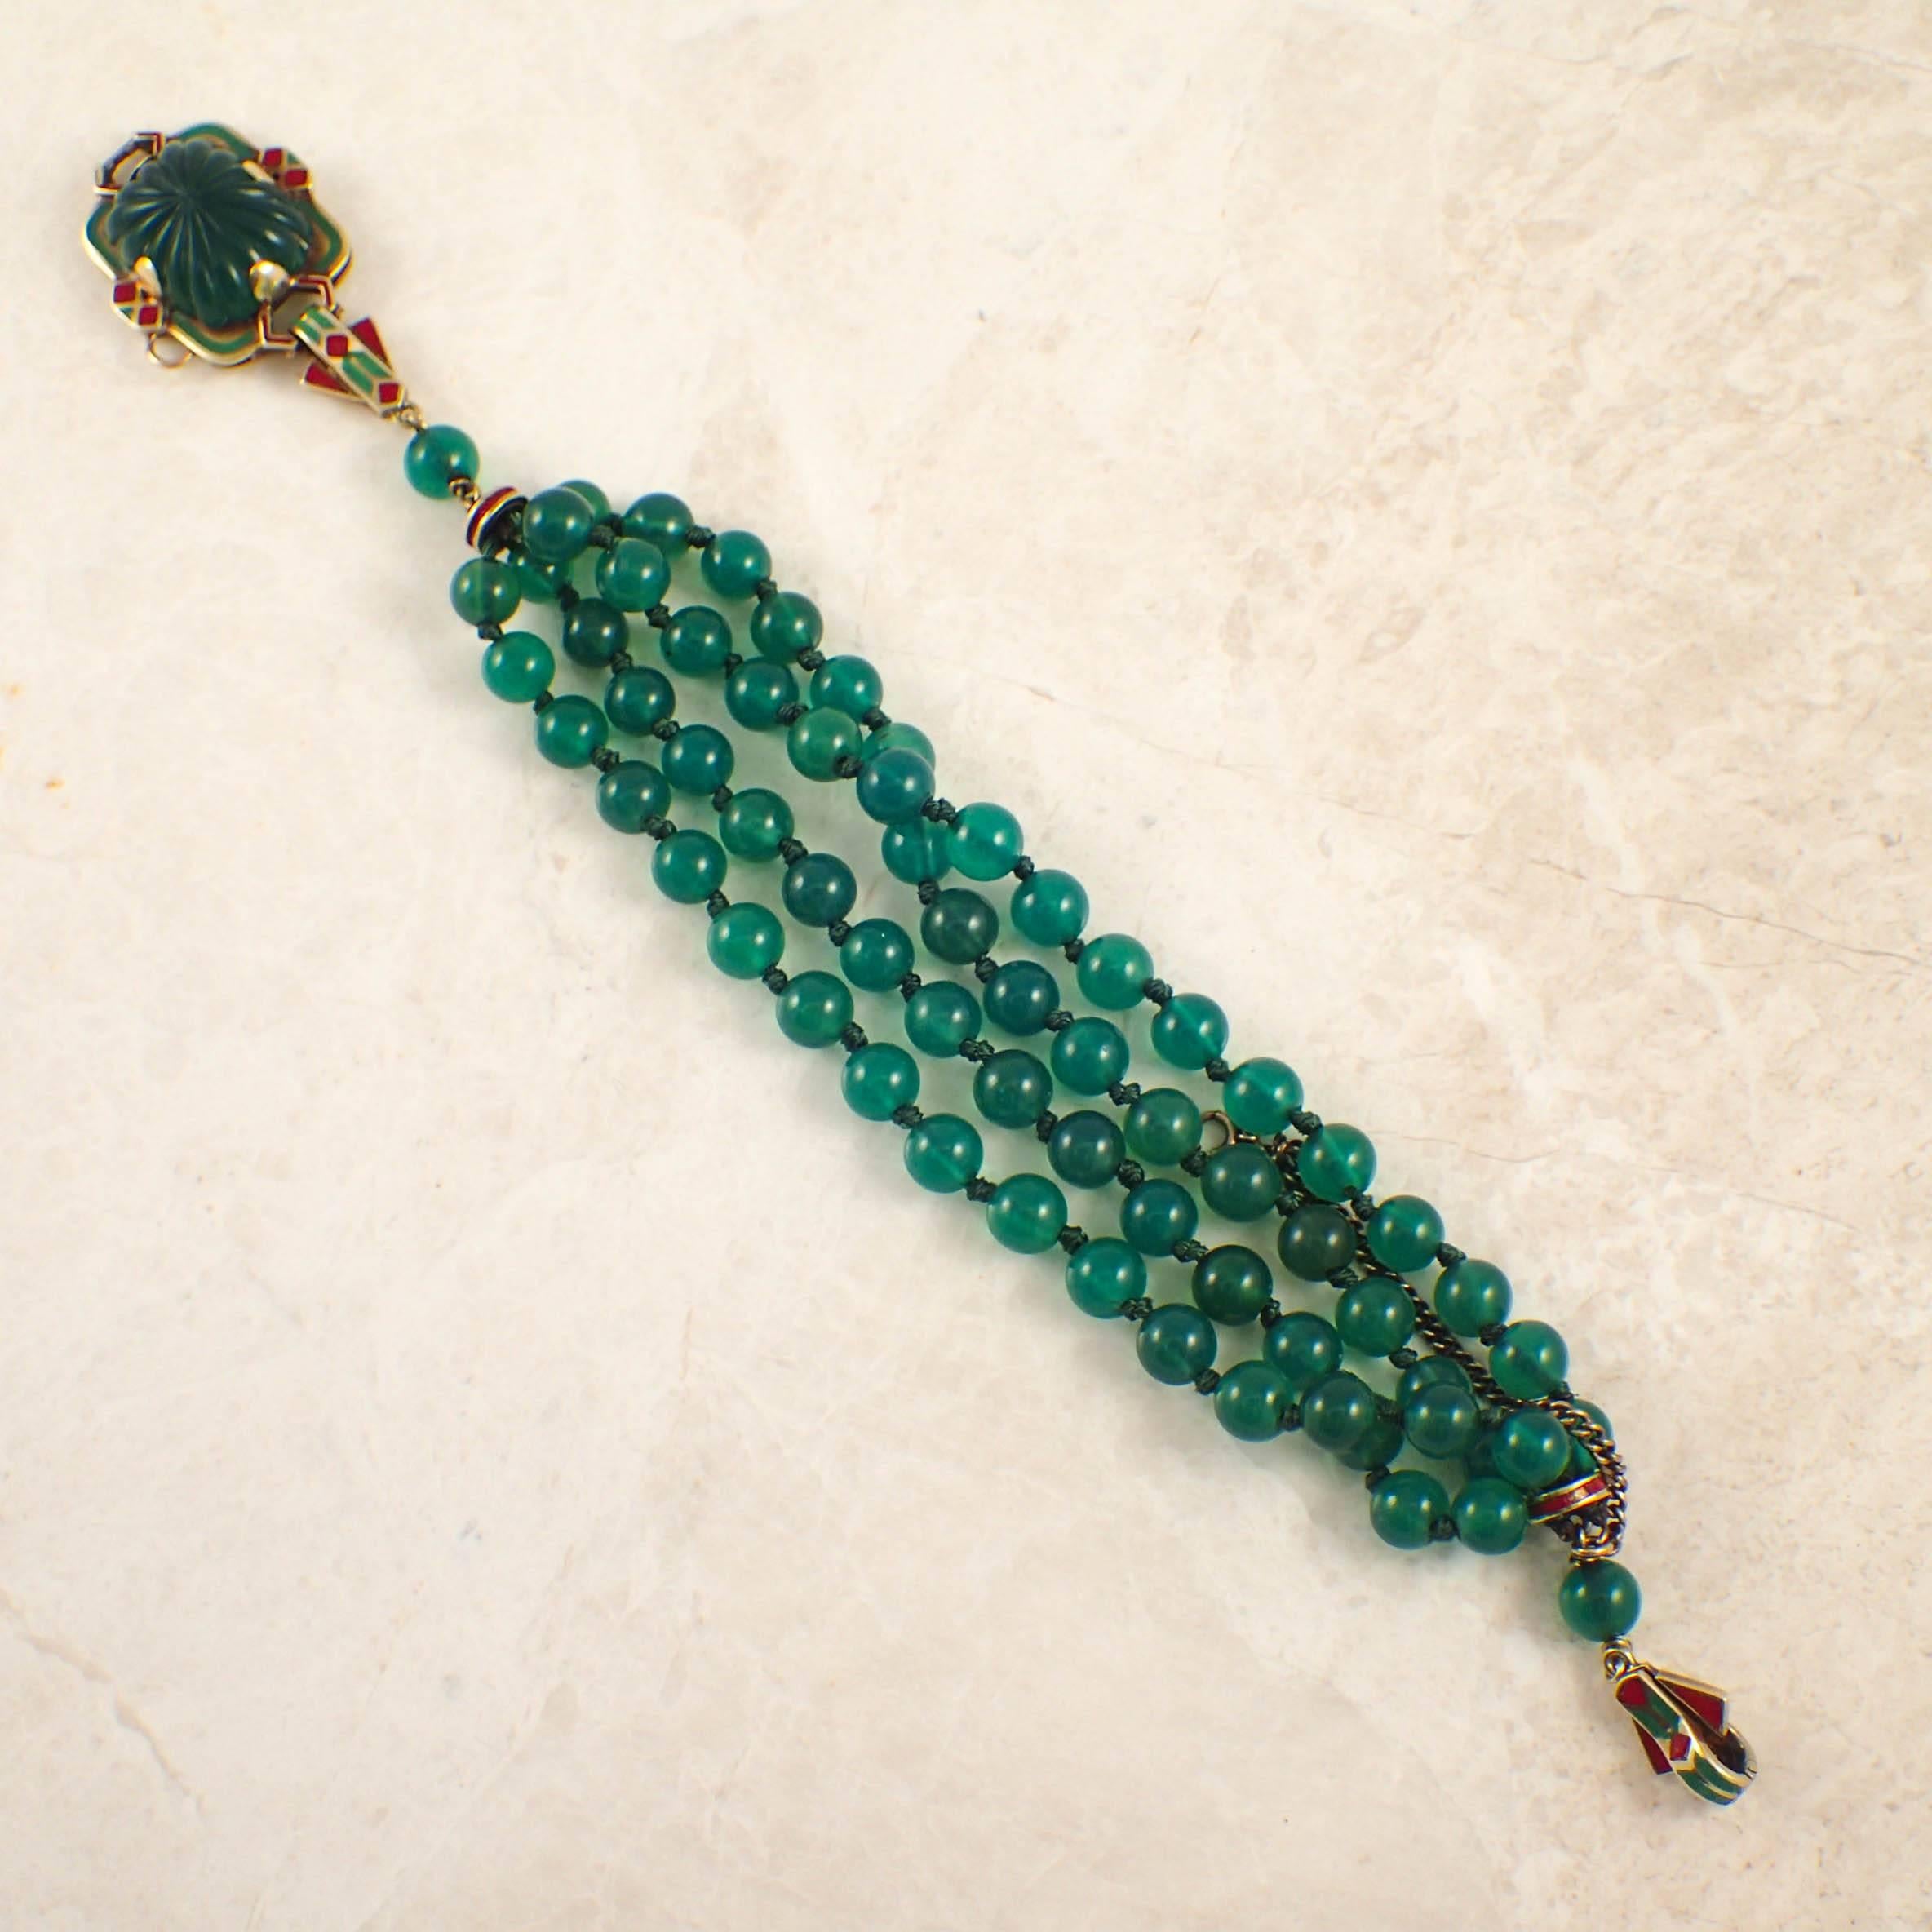 14k yellow gold Art Deco green onyx and enamel bracelet. The multi strand bead bracelet composed of green onyx beads measuring approximately 6.5mm, finished with a carved green onyx measuring 18.5x14mm, set into the clasp, and decorated with red and